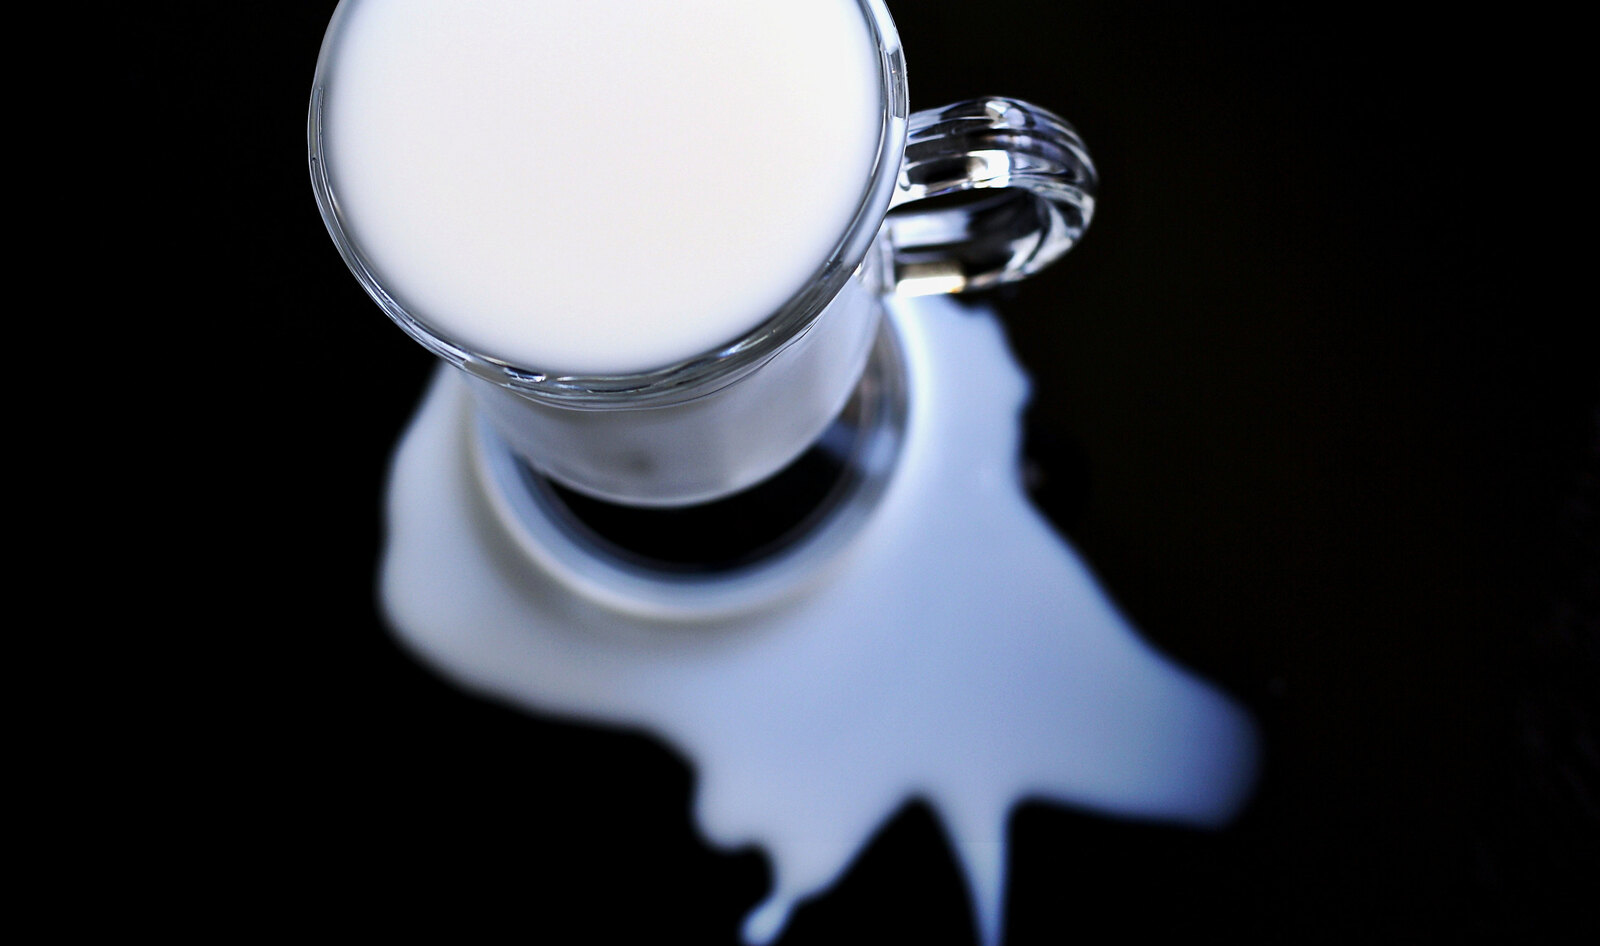 Dairy Industry Ads Claim Milk Hydrates Better Than Water. Now It’s Being Challenged